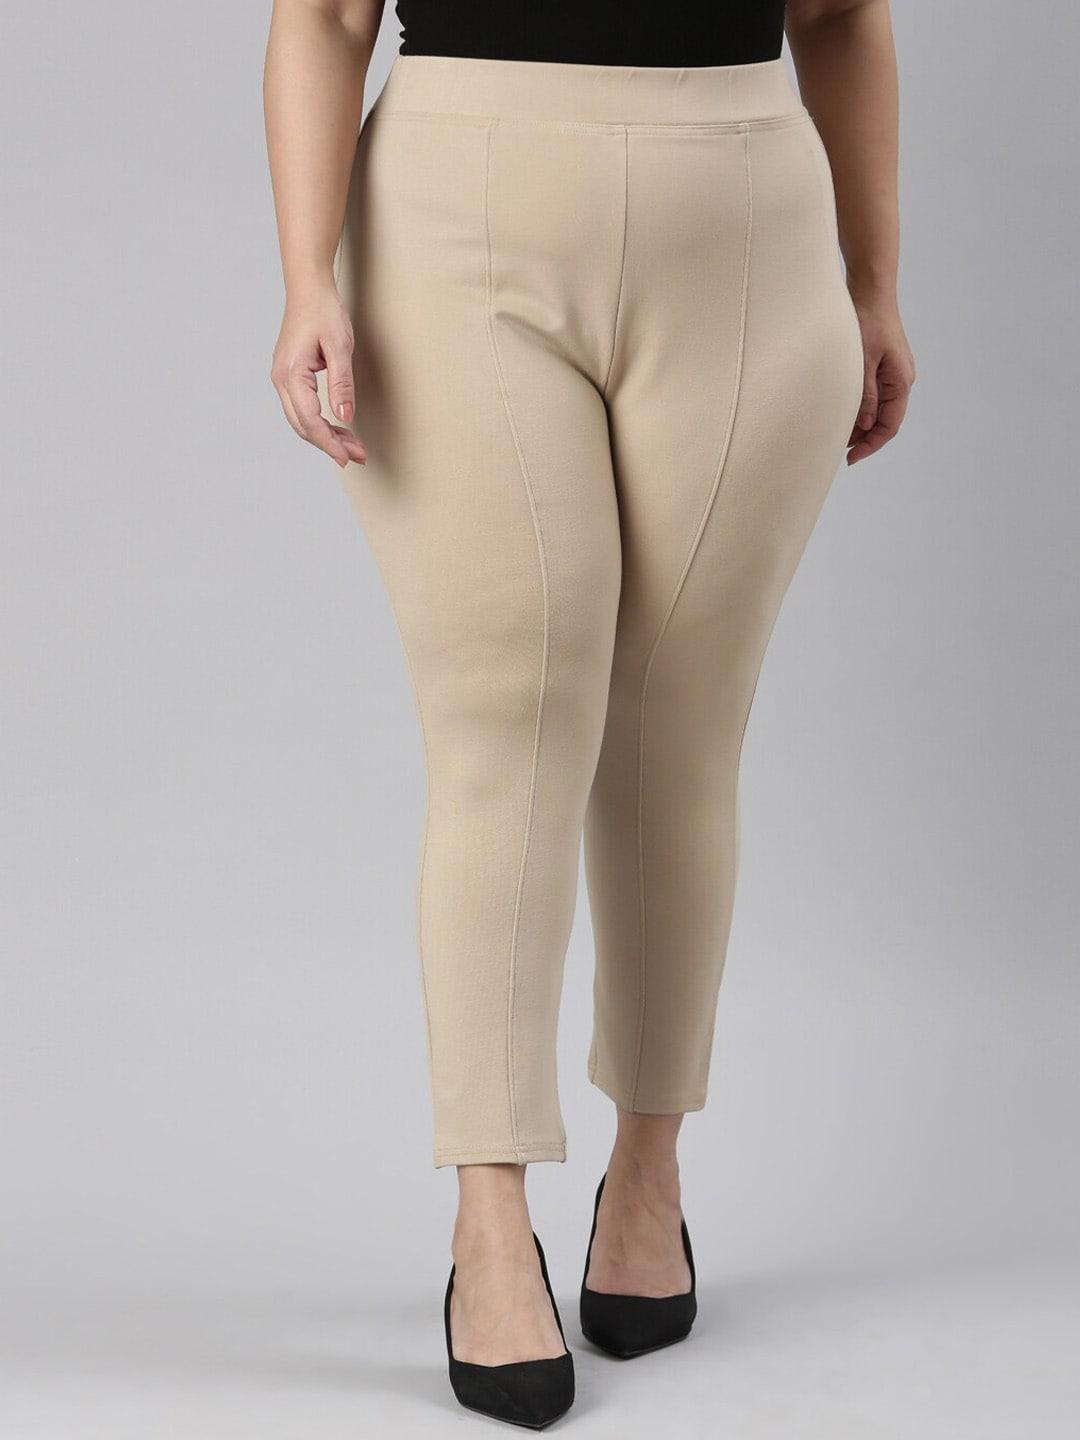 the-pink-moon-women-plus-size-skinny-fit-high-rise-trousers